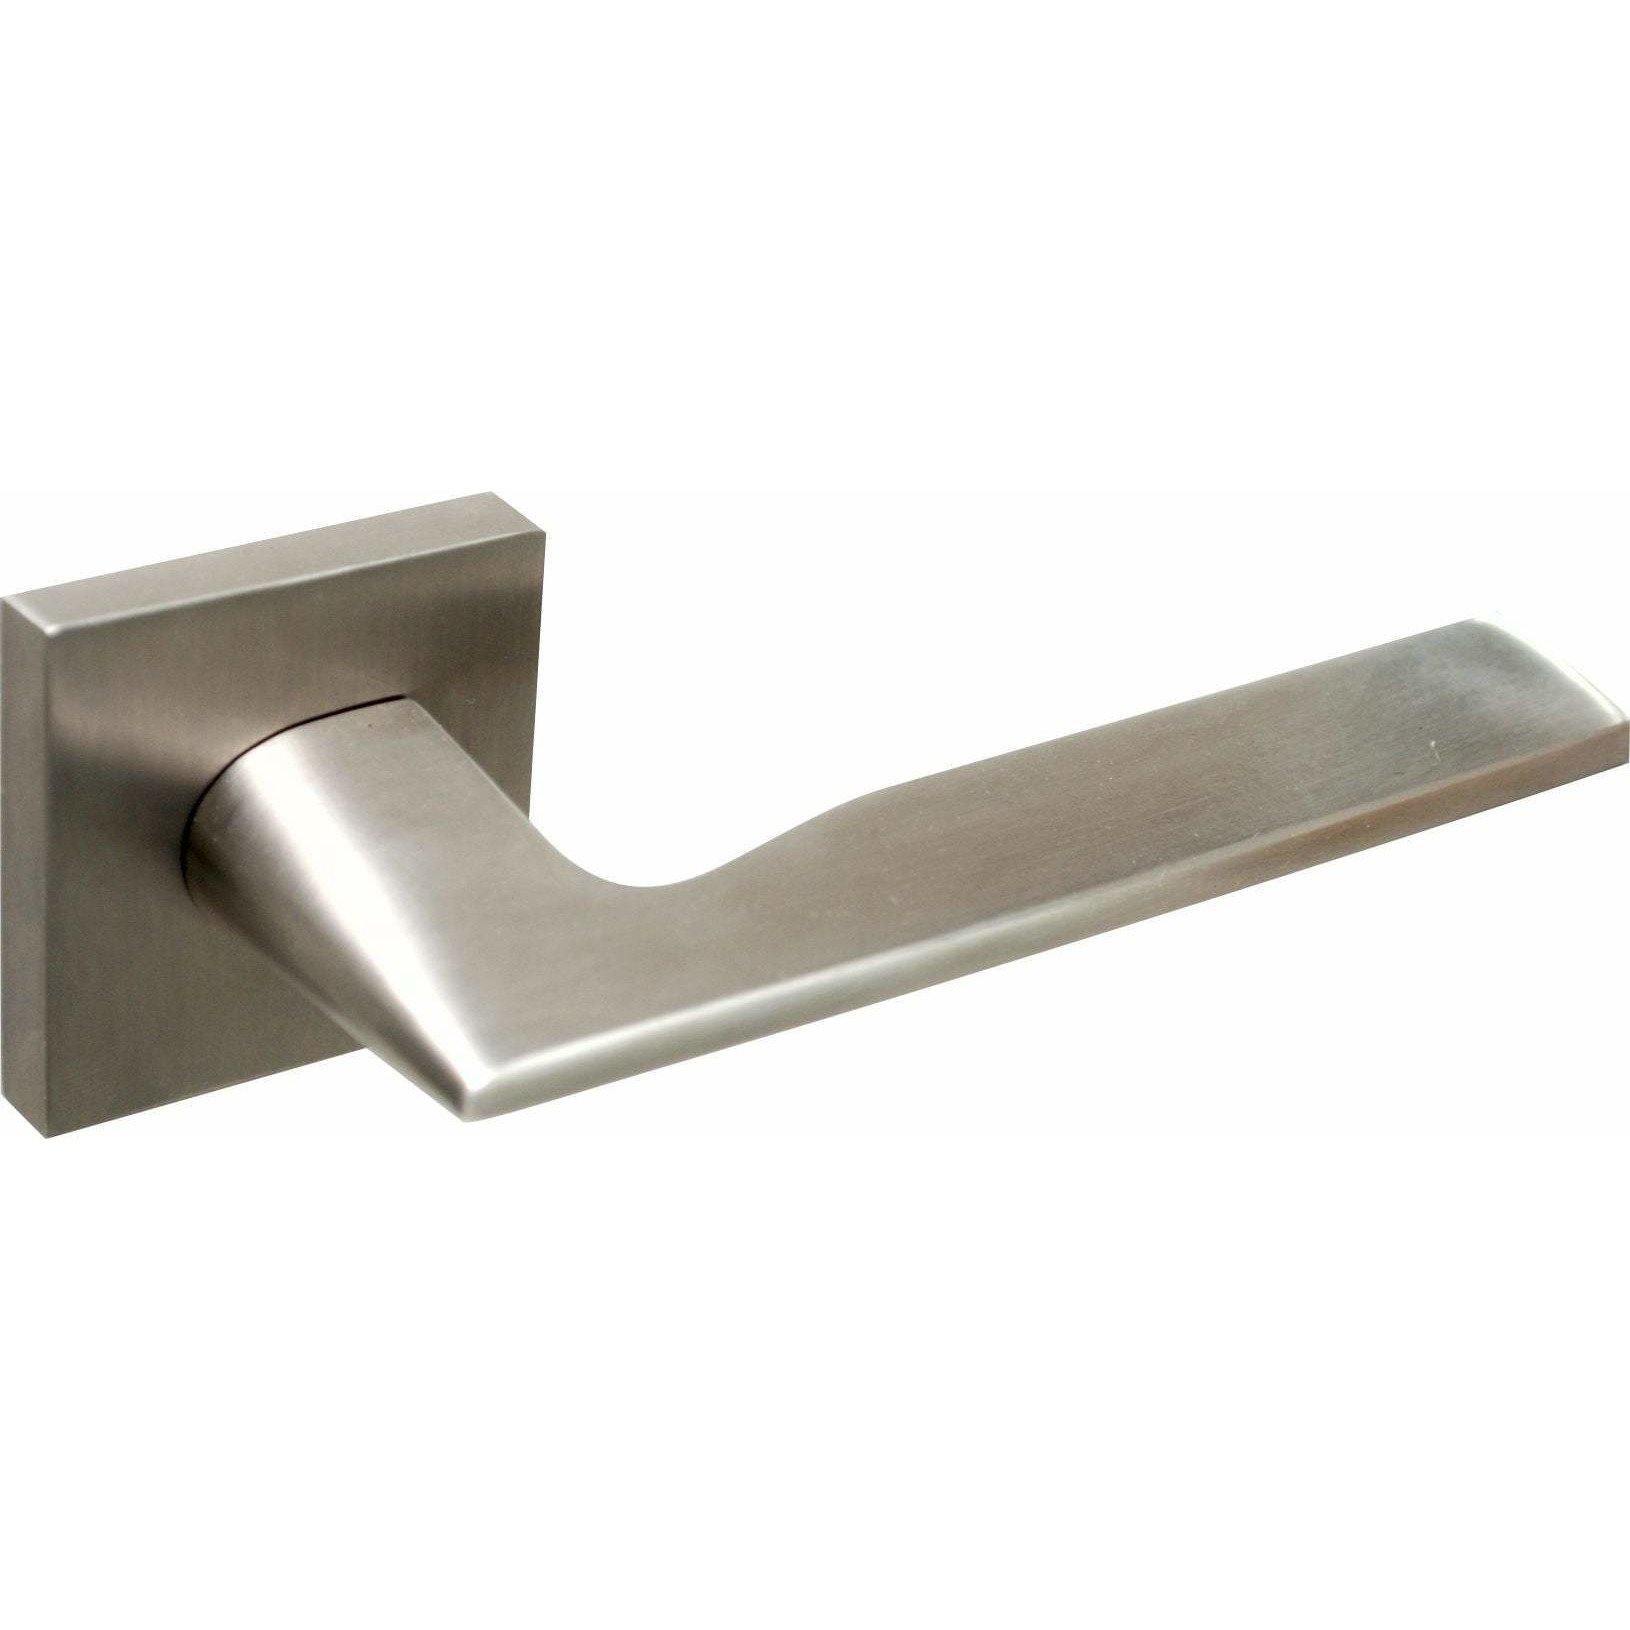 Slim solid stainless steel lever handle on square rose